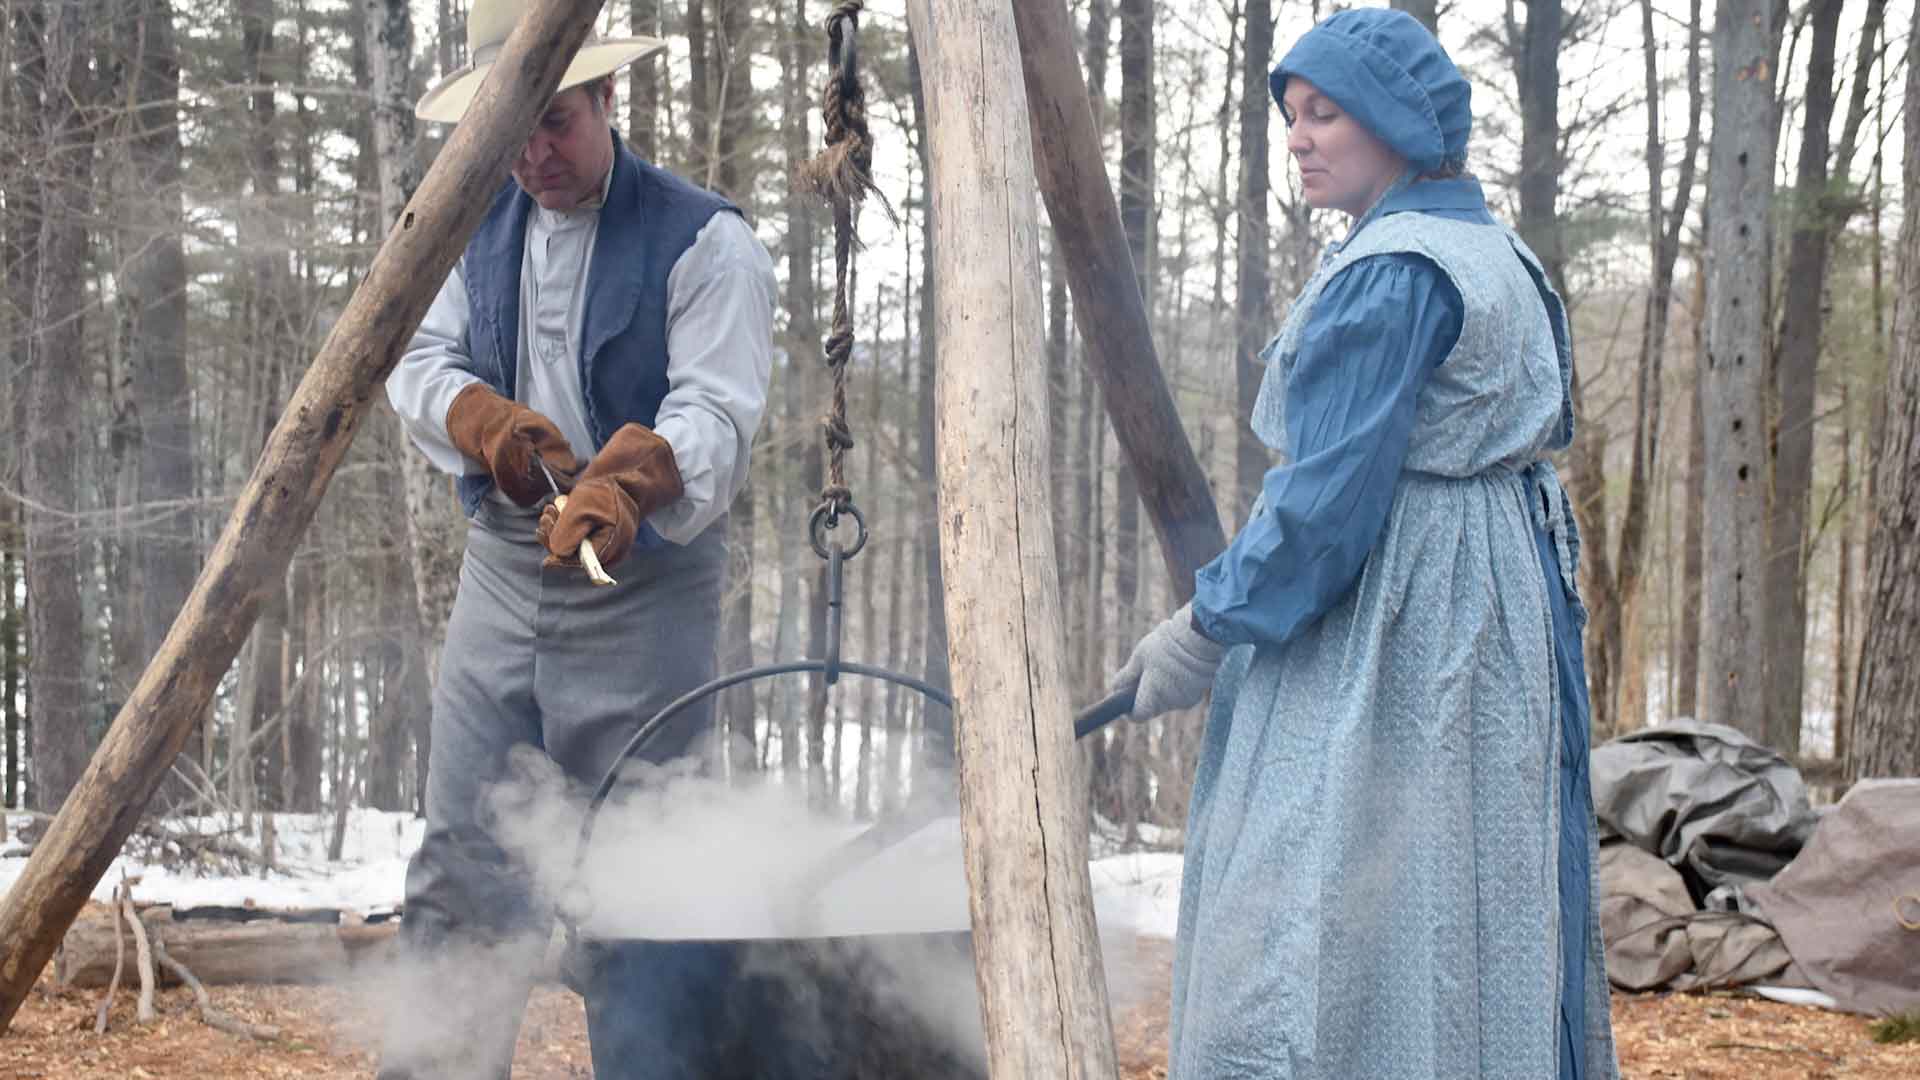 People participating in the Maple Harvest Festival at Shaver's Creek